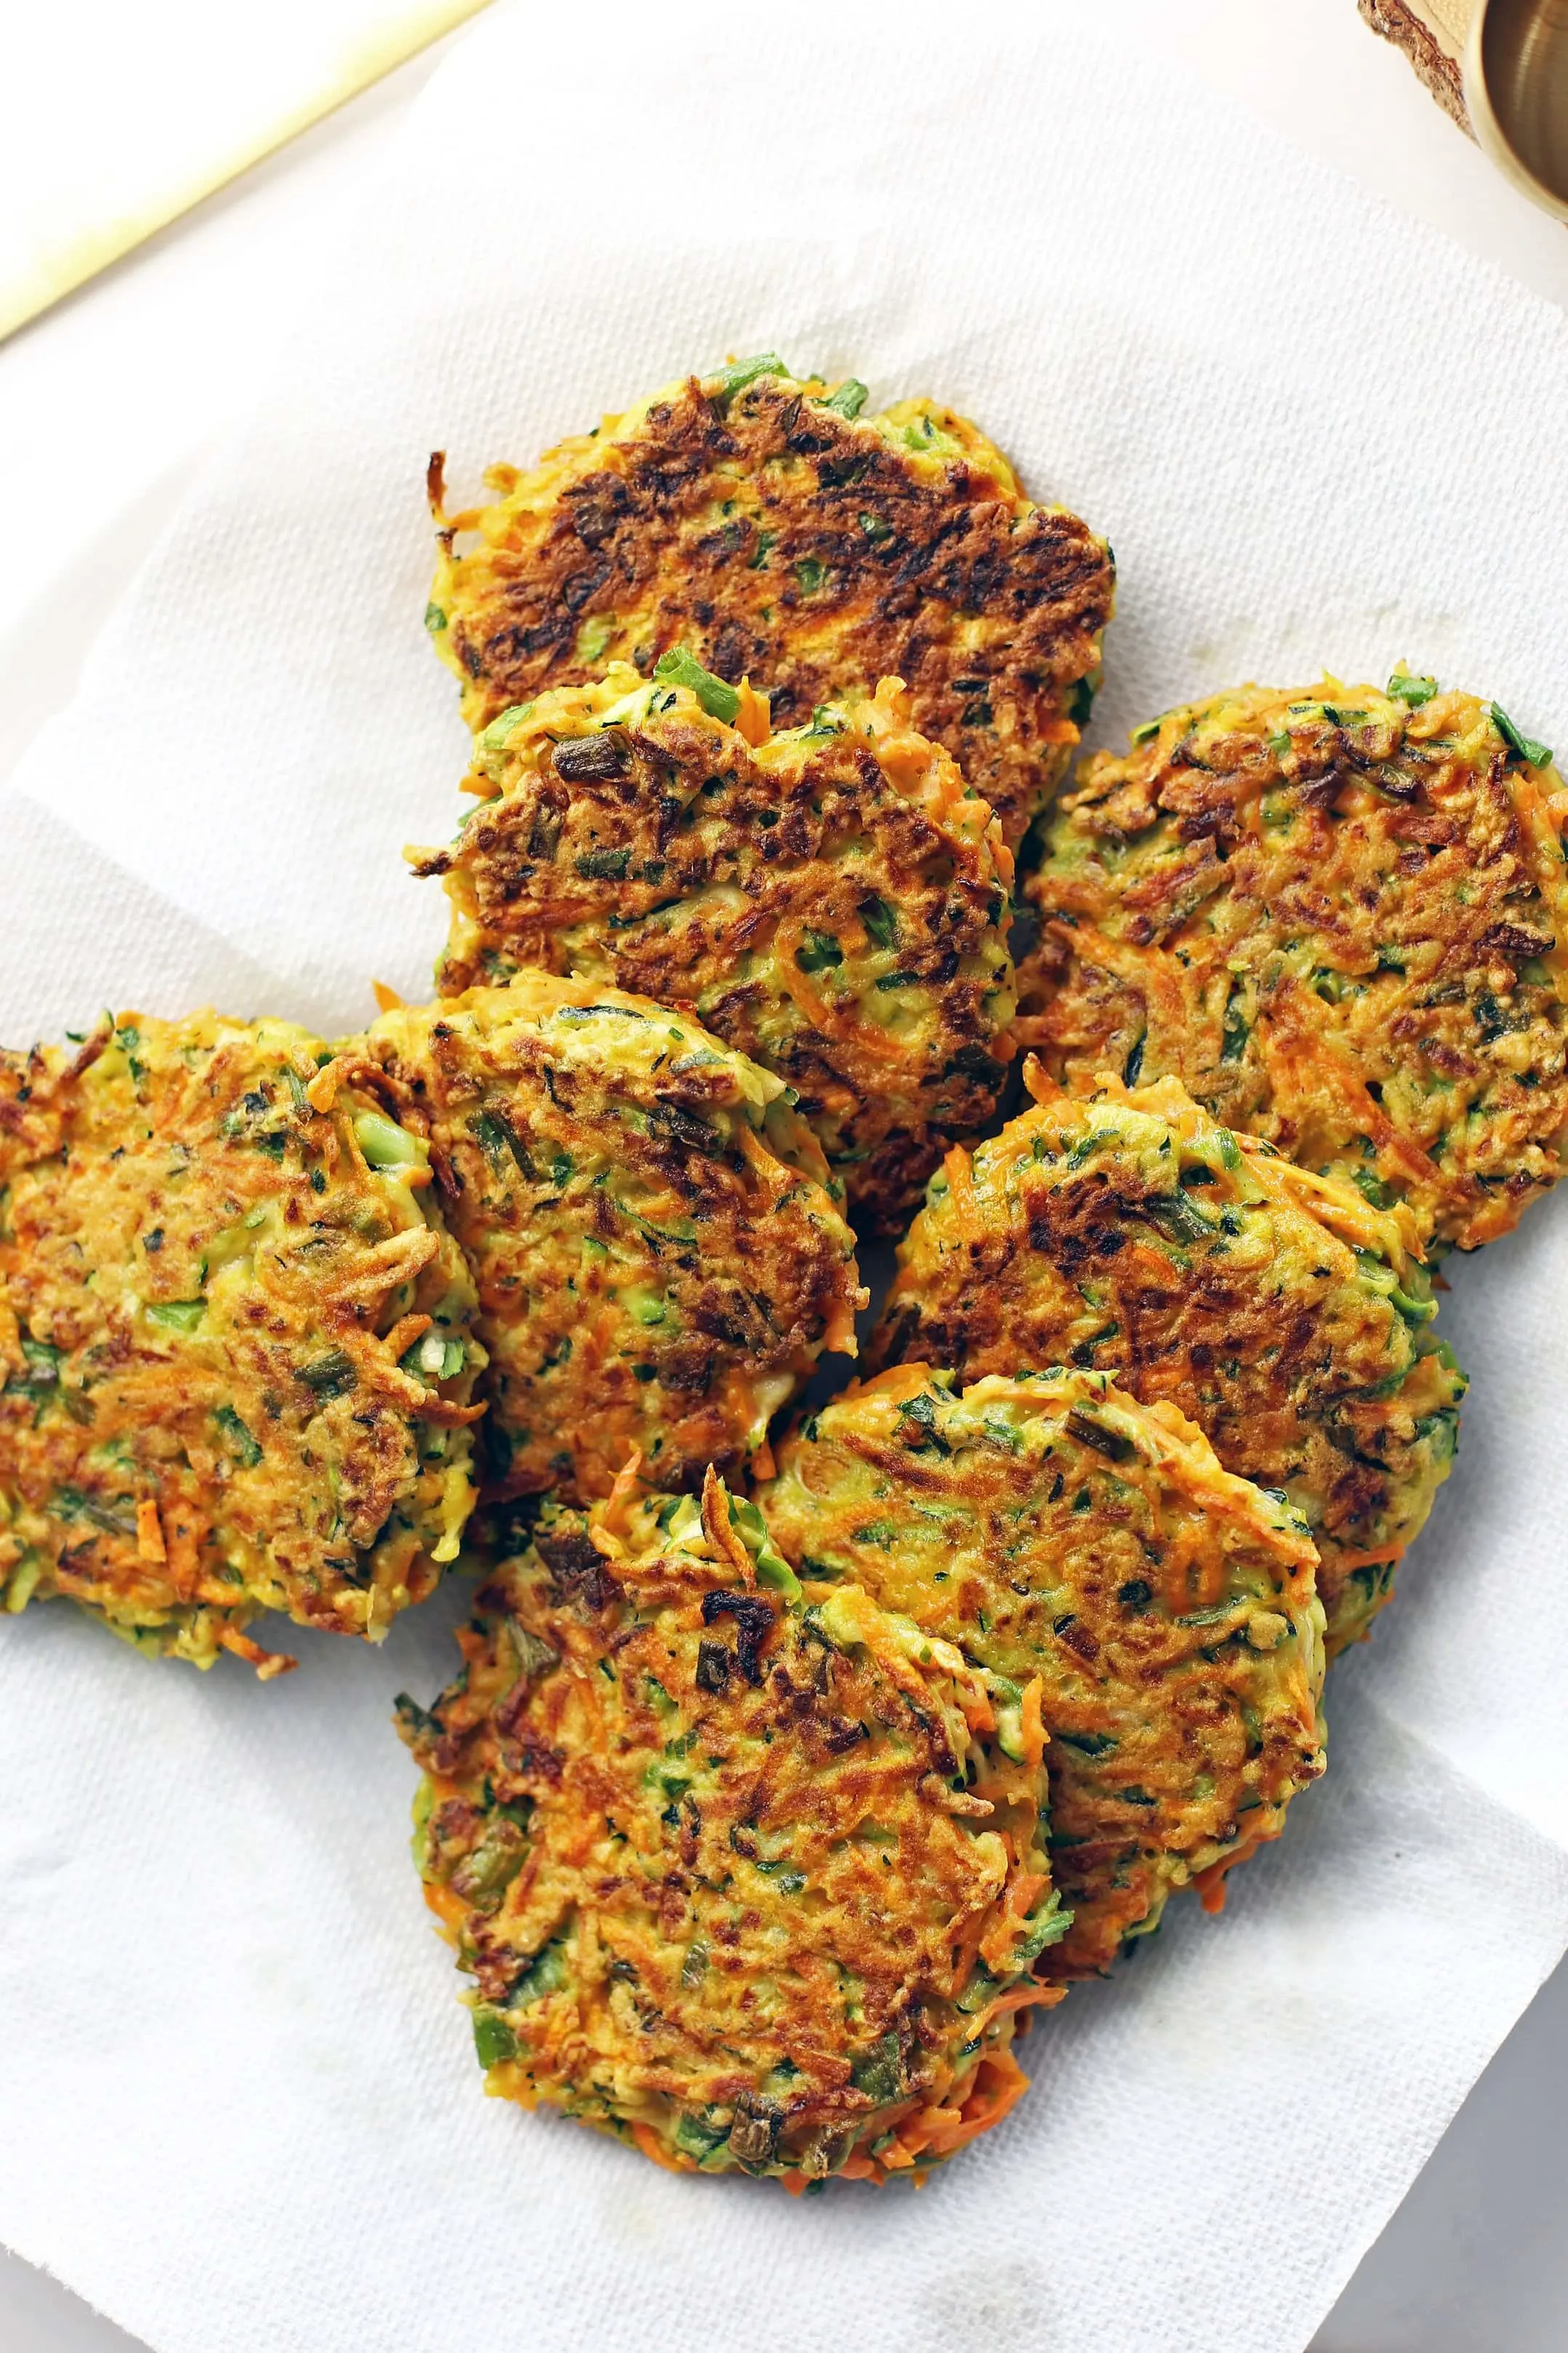 Eight freshly fried zucchini carrot pancakes placed on a paper towel lined plate.